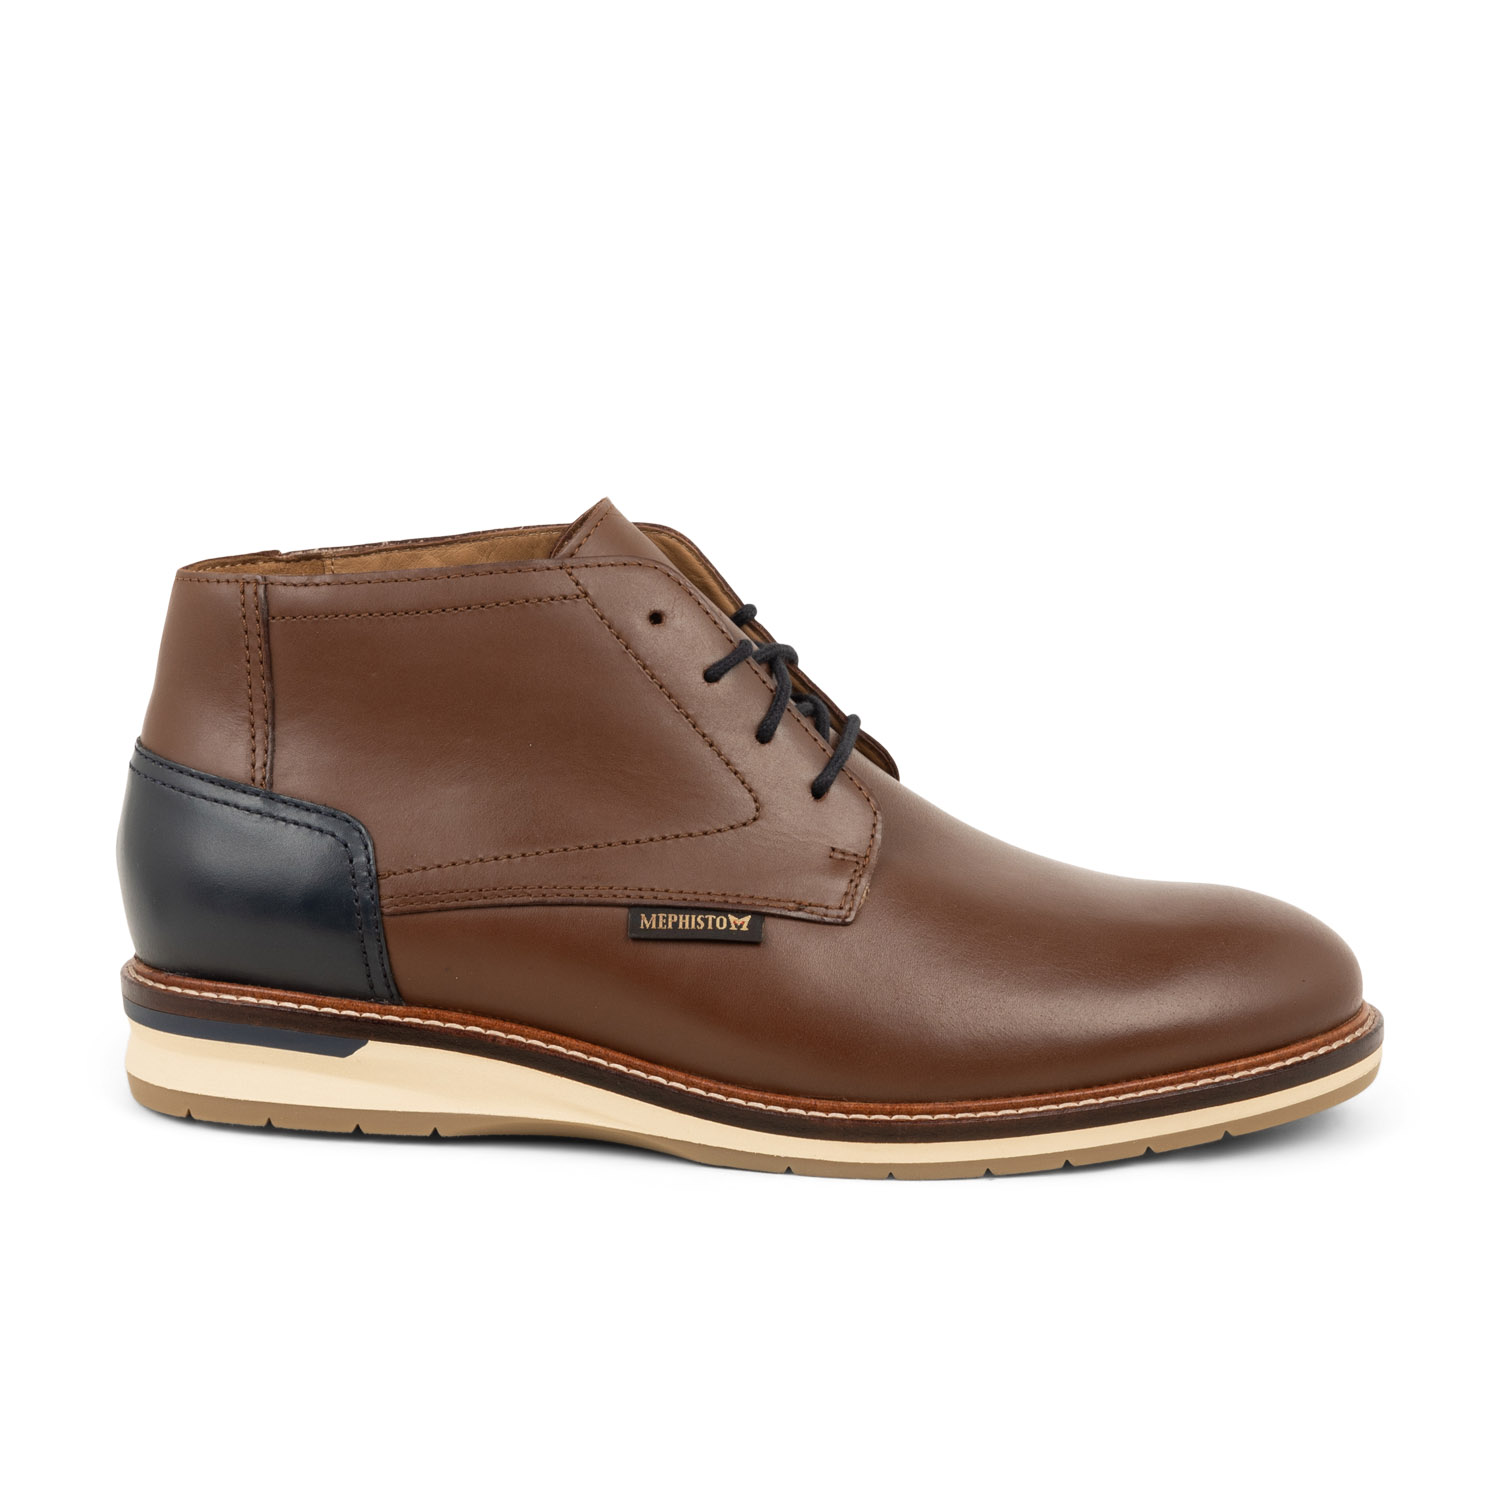 01 - FREDERICO - MEPHISTO - Chaussures à lacets - Cuir